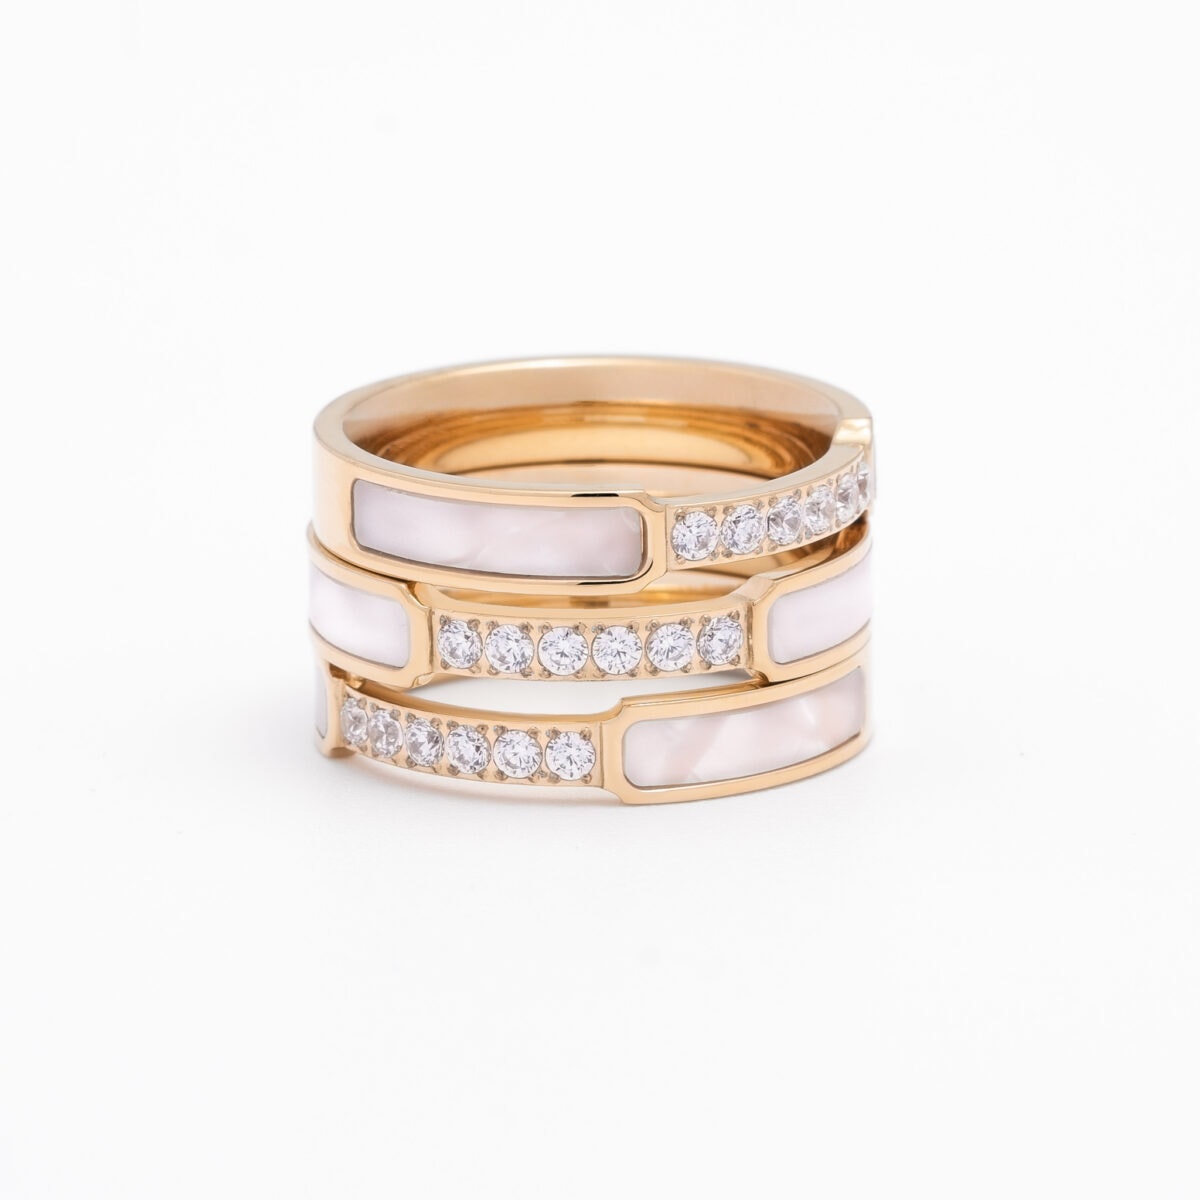 https://m.clubbella.co/product/lace-nacre-staple-ring/ Lace Nacre Gold Ring (1)